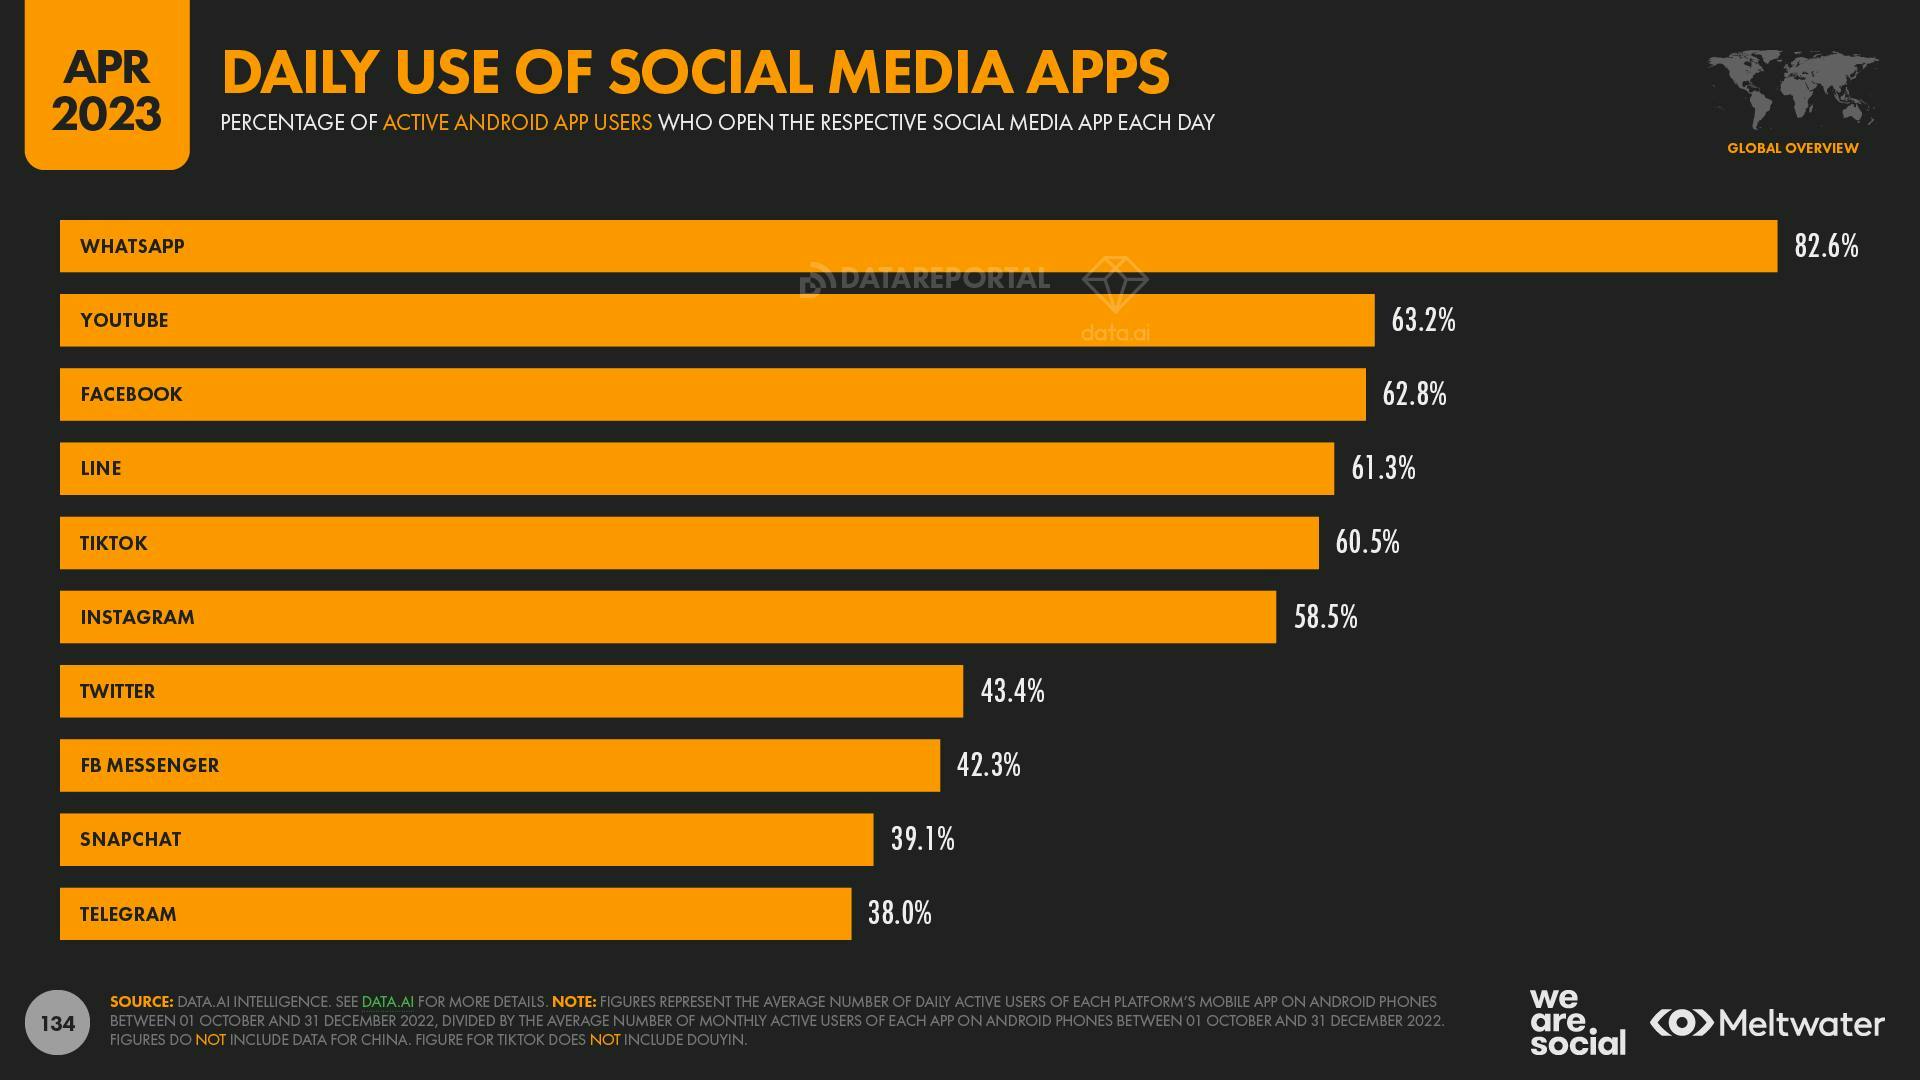 April 2023 Global State of Digital Report: Daily Use of Social Media Apps